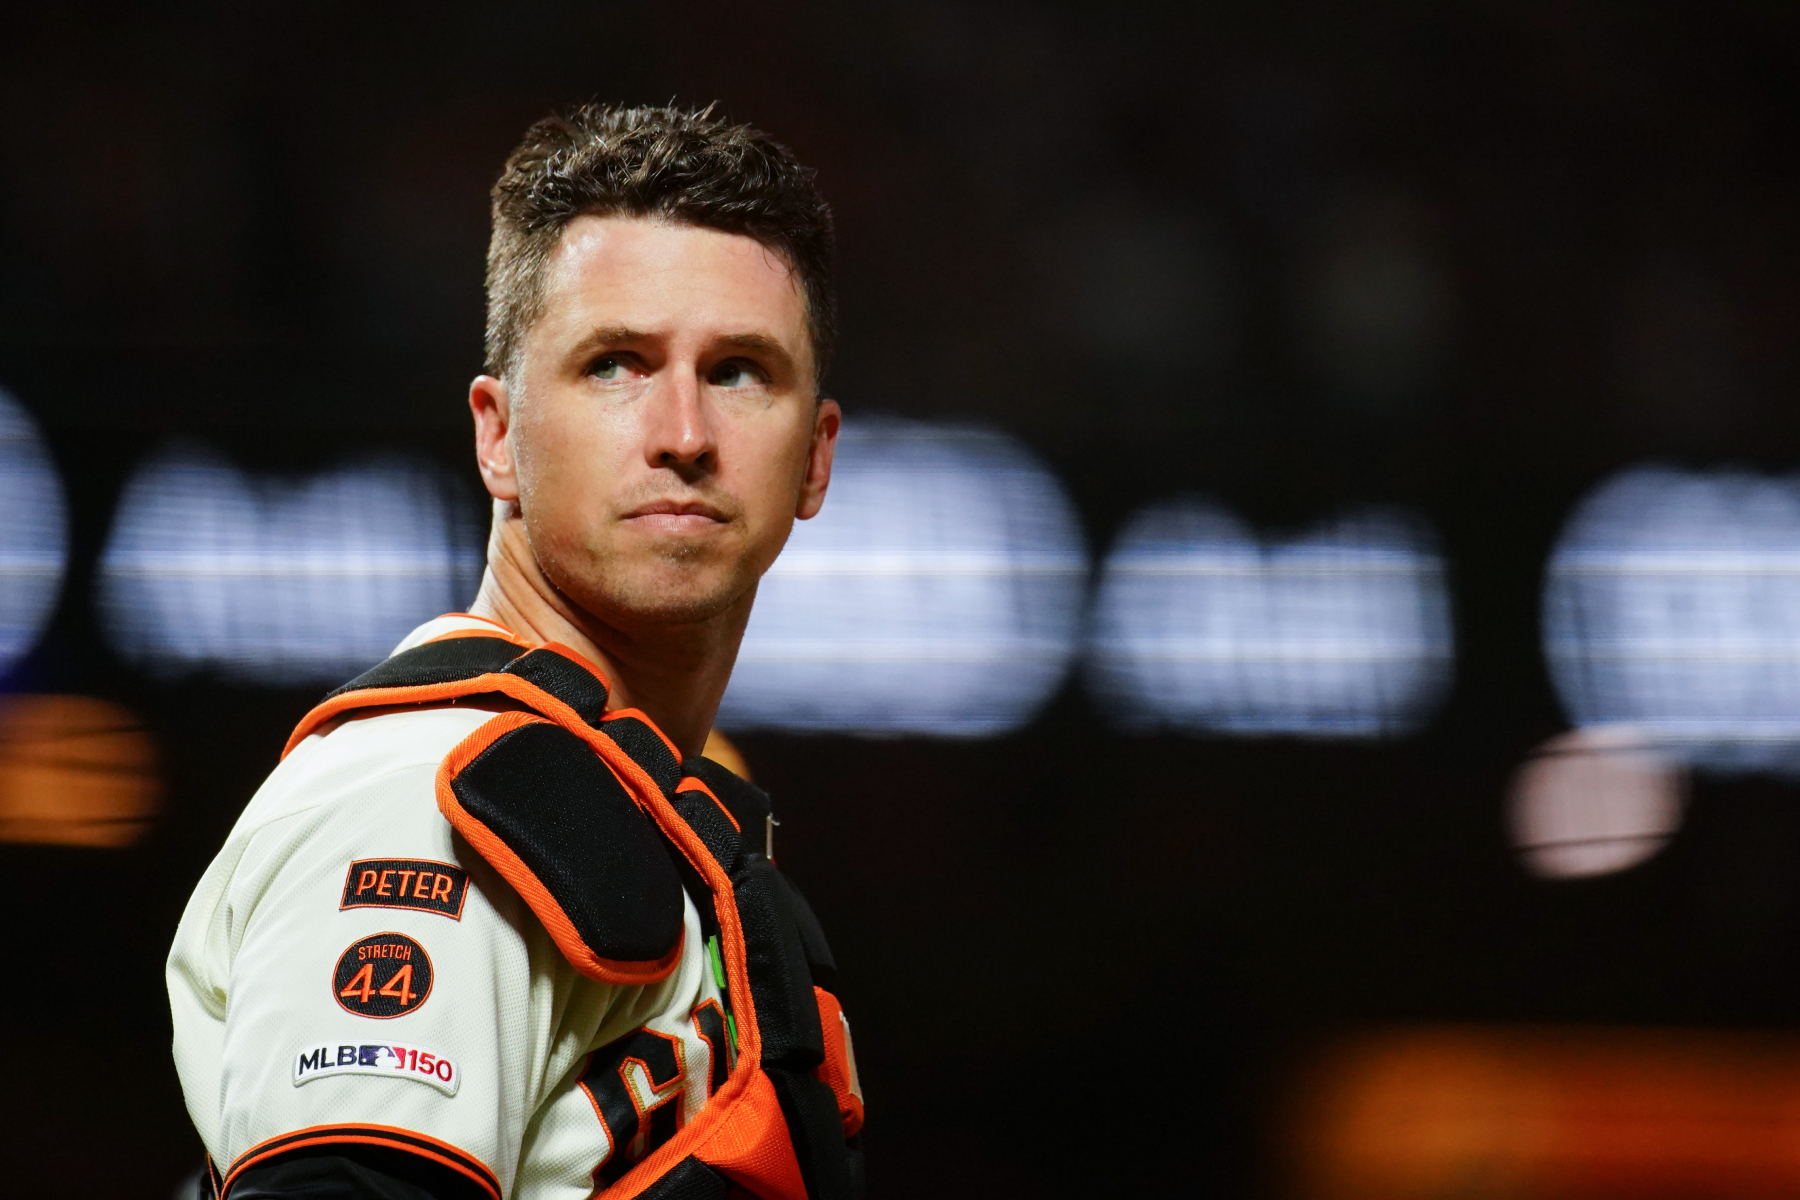 Buster Posey’s Sibling Accomplished a Nearly Impossible Feat at the Plate